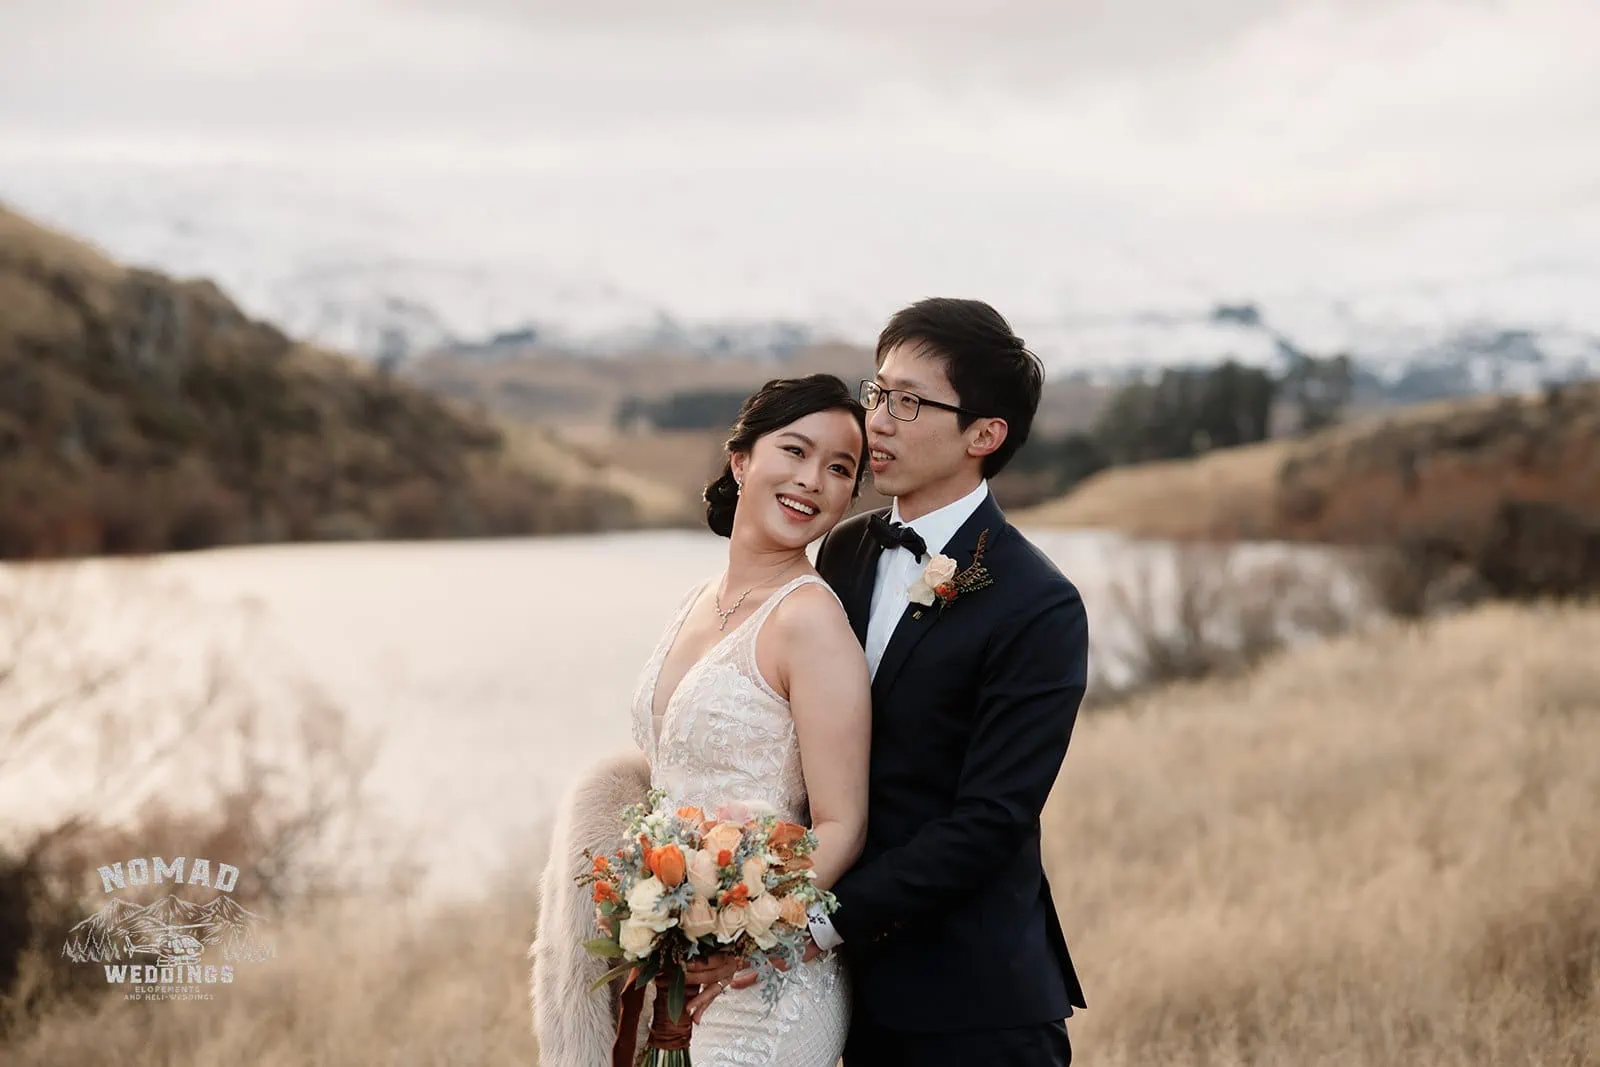 Joanna and Tony's pre-wedding shoot captures the breathtaking scenery of Queenstown, New Zealand, with a stunning lake and mountain backdrop.